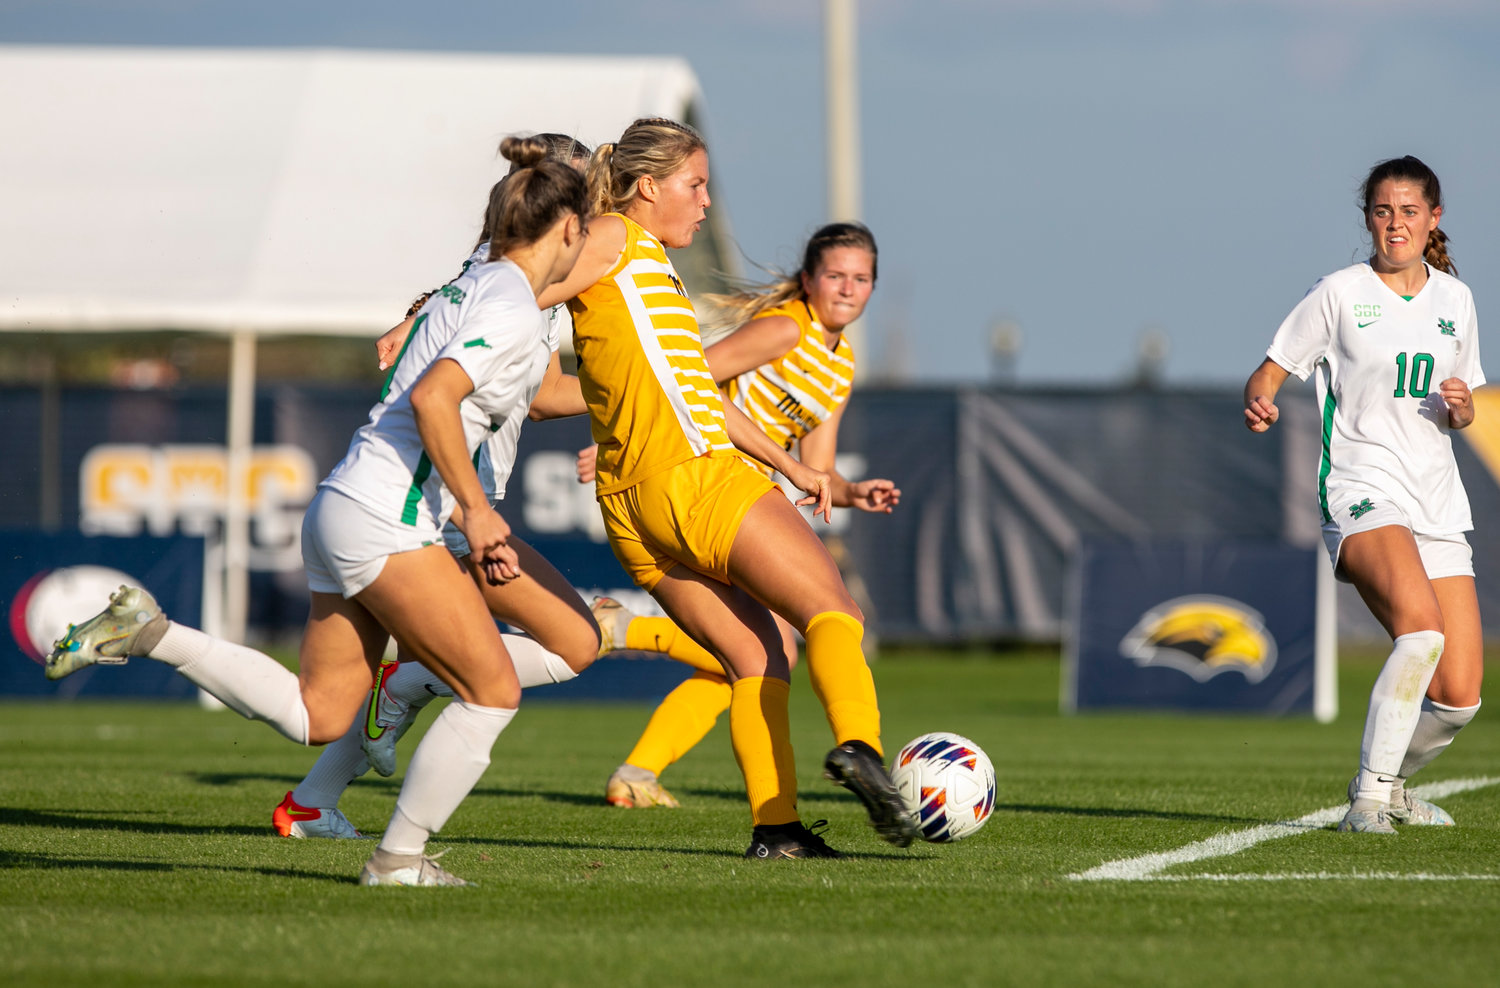 Appalachian State junior Izzi Wood connects on a shot during the first game of the Sun Belt Conference Championship at the Foley Sports Tourism Complex Monday afternoon, Oct. 31. For the seventh season, the conference will crown a women's soccer champion in Foley.